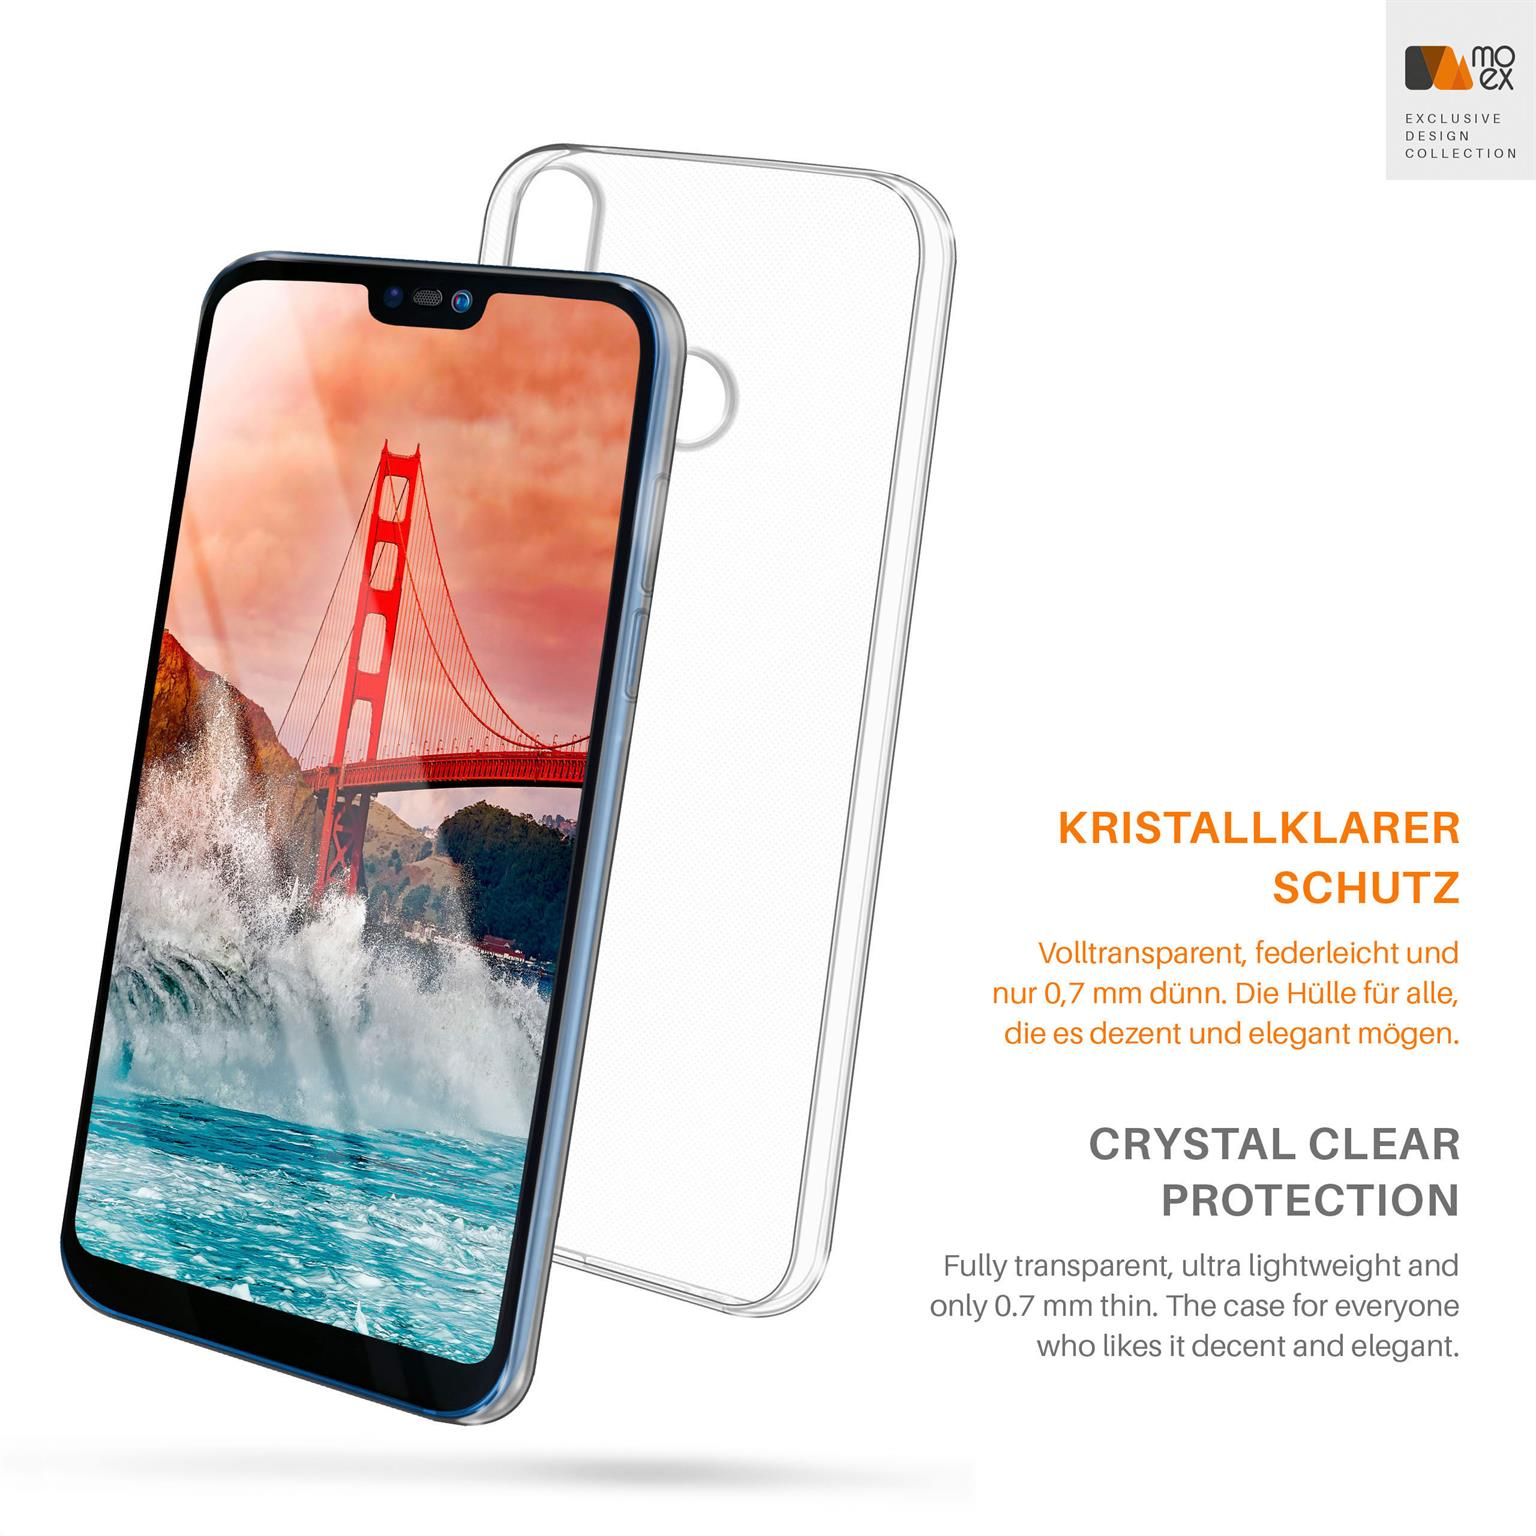 MOEX Aero Case, Backcover, Huawei, Honor 8X, Crystal-Clear